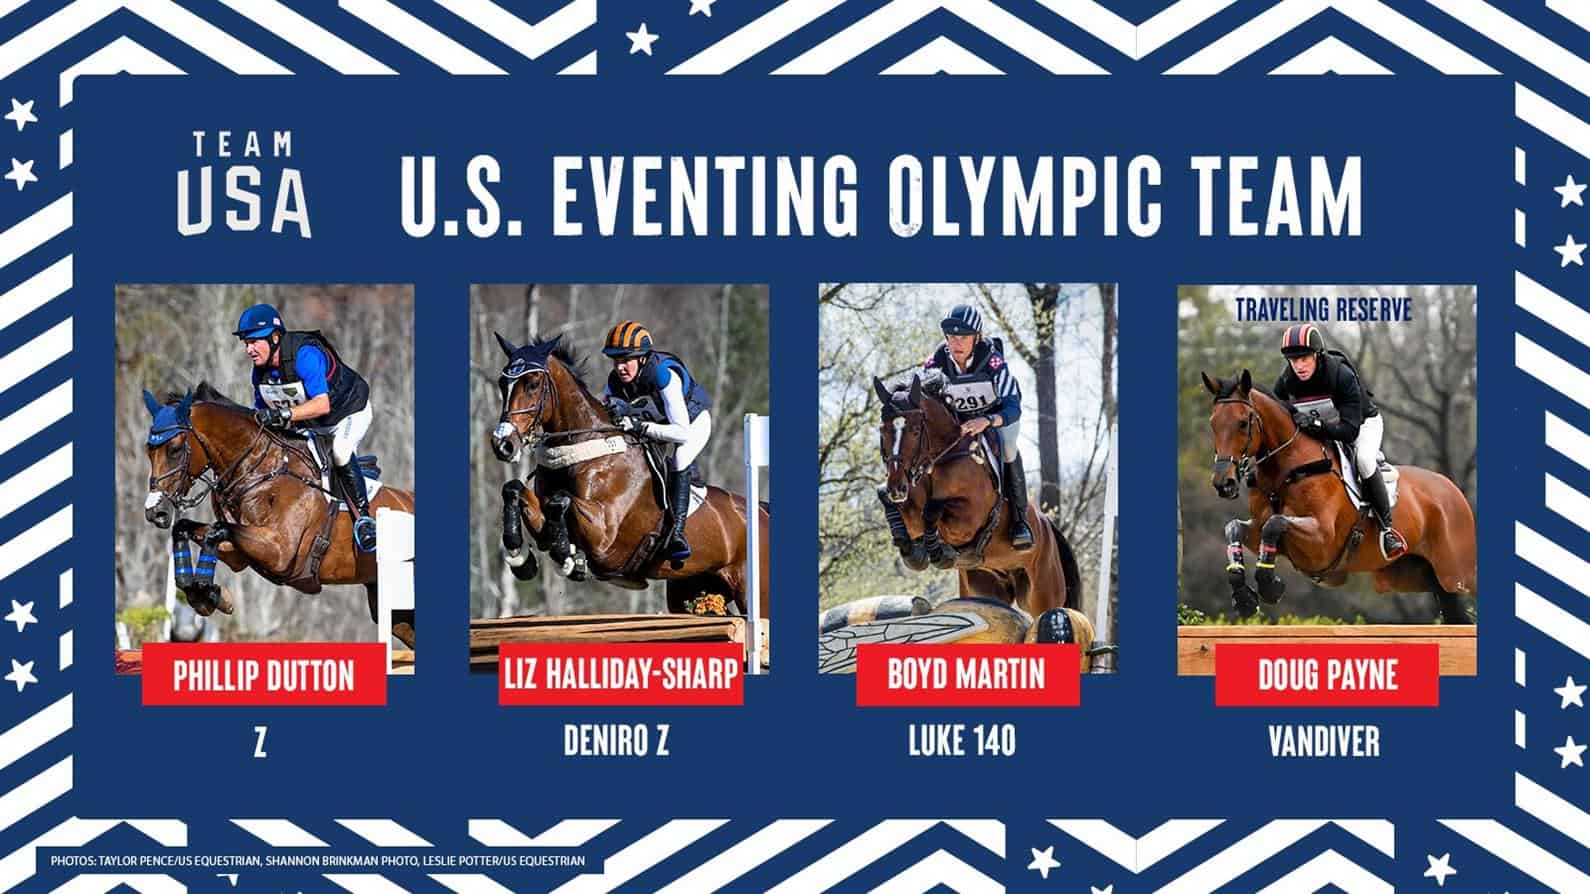 U.S. Eventing Olympic Team Announced for Tokyo USET Foundation